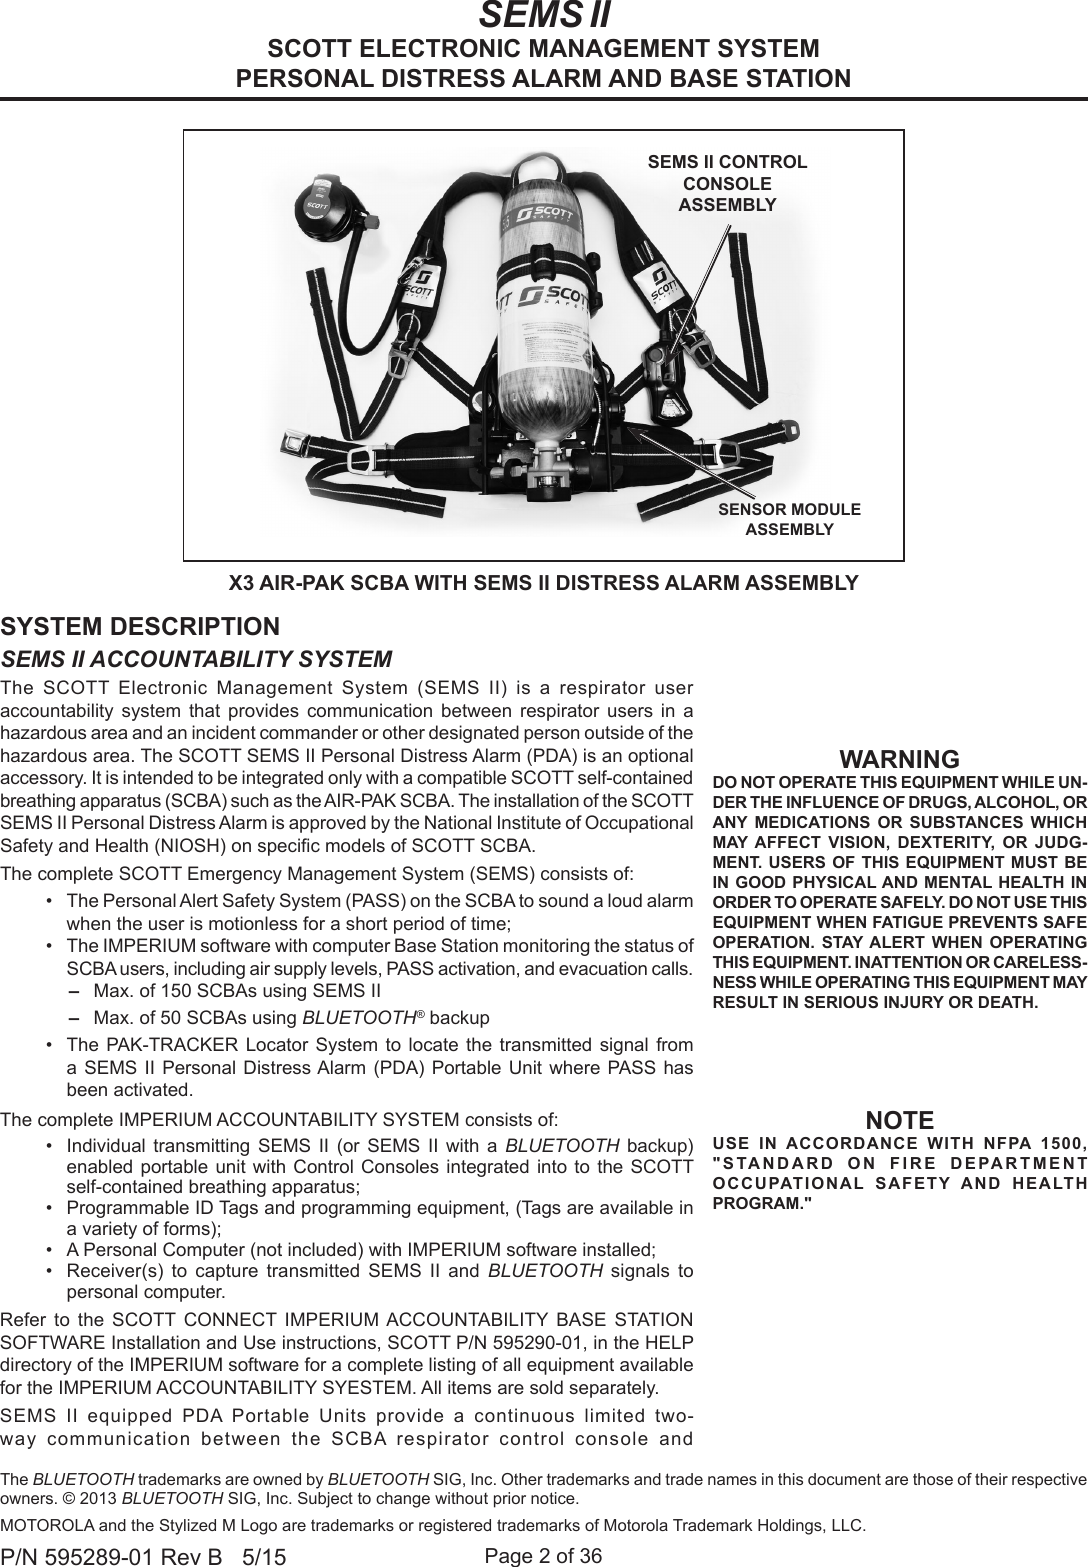 Page 2 of 36P/N 595289-01 Rev B   5/15WARNINGDO NOT OPERATE THIS EQUIPMENT WHILE UN-DER THE INFLUENCE OF DRUGS, ALCOHOL, OR ANY MEDICATIONS OR SUBSTANCES WHICH MAY AFFECT VISION, DEXTERITY, OR JUDG-MENT. USERS OF THIS EQUIPMENT MUST BE IN GOOD PHYSICAL AND MENTAL HEALTH IN ORDER TO OPERATE SAFELY. DO NOT USE THIS EQUIPMENT WHEN FATIGUE PREVENTS SAFE OPERATION. STAY ALERT WHEN OPERATING THIS EQUIPMENT. INATTENTION OR CARELESS-NESS WHILE OPERATING THIS EQUIPMENT MAY RESULT IN SERIOUS INJURY OR DEATH.SYSTEM DESCRIPTIONSEMS II ACCOUNTABILITY SYSTEMThe SCOTT Electronic Management System (SEMS II) is a respirator user  accountability system that provides communication between respirator users in a hazardous area and an incident commander or other designated person outside of the hazardous area. The SCOTT SEMS II Personal Distress Alarm (PDA) is an optional accessory. It is intended to be integrated only with a compatible SCOTT self-contained breathing apparatus (SCBA) such as the AIR-PAK SCBA. The installation of the SCOTT SEMS II Personal Distress Alarm is approved by the National Institute of Occupational Safety and Health (NIOSH) on specic models of SCOTT SCBA. The complete SCOTT Emergency Management System (SEMS) consists of:•  The Personal Alert Safety System (PASS) on the SCBA to sound a loud alarm when the user is motionless for a short period of time;•  The IMPERIUM software with computer Base Station monitoring the status of SCBA users, including air supply levels, PASS activation, and evacuation calls. –Max. of 150 SCBAs using SEMS II –Max. of 50 SCBAs using BLUETOOTH® backup•  The PAK-TRACKER Locator System to locate the transmitted signal from a SEMS II Personal Distress Alarm (PDA) Portable Unit where PASS has been activated.The complete IMPERIUM ACCOUNTABILITY SYSTEM consists of:•  Individual transmitting SEMS II (or SEMS II with a BLUETOOTH backup) enabled portable unit with Control Consoles integrated into to the SCOTT self-contained breathing apparatus; •  Programmable ID Tags and programming equipment, (Tags are available in a variety of forms); •  A Personal Computer (not included) with IMPERIUM software installed;•  Receiver(s) to capture transmitted SEMS II and BLUETOOTH  signals to personal computer. Refer to the SCOTT CONNECT IMPERIUM ACCOUNTABILITY BASE STATION SOFTWARE Installation and Use instructions, SCOTT P/N 595290-01, in the HELP directory of the IMPERIUM software for a complete listing of all equipment available for the IMPERIUM ACCOUNTABILITY SYESTEM. All items are sold separately.SEMS II equipped PDA Portable Units provide a continuous limited two-way communication between the SCBA respirator control console and  X3 AIR-PAK SCBA WITH SEMS II DISTRESS ALARM ASSEMBLYSEMS II CONTROL CONSOLE ASSEMBLYSENSOR MODULE ASSEMBLY SEMS IISCOTT ELECTRONIC MANAGEMENT SYSTEMPERSONAL DISTRESS ALARM AND BASE STATIONNOTEUSE IN ACCORDANCE WITH NFPA 1500, &quot;STANDARD ON FIRE DEPARTMENT OCCUPATIONAL SAFETY AND HEALTH PROGRAM.&quot;The BLUETOOTH trademarks are owned by BLUETOOTH SIG, Inc. Other trademarks and trade names in this document are those of their respective owners. © 2013 BLUETOOTH SIG, Inc. Subject to change without prior notice.MOTOROLA and the Stylized M Logo are trademarks or registered trademarks of Motorola Trademark Holdings, LLC.